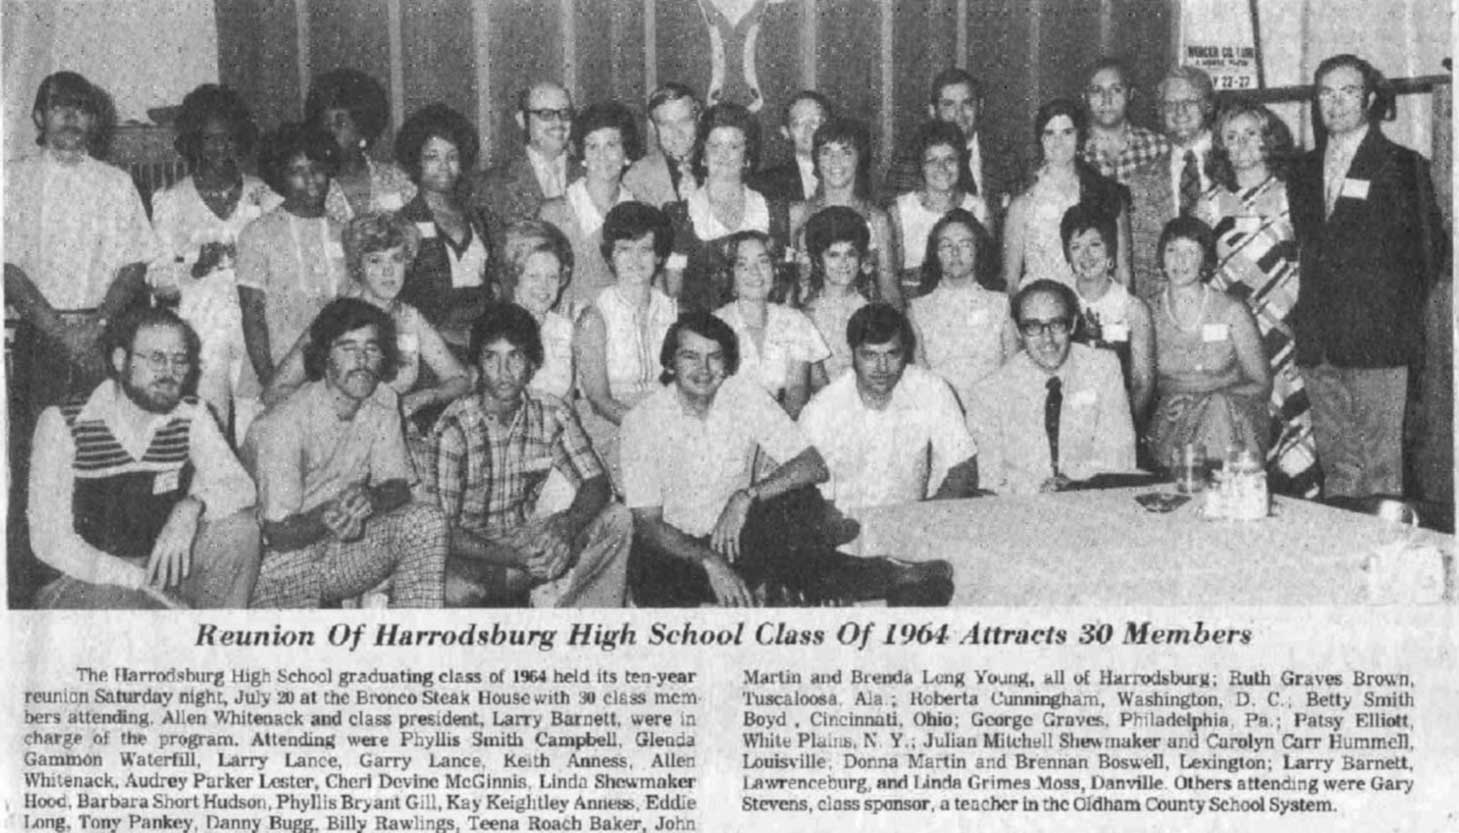 Harrodsburg Herald 1964 Reunion article with photograph